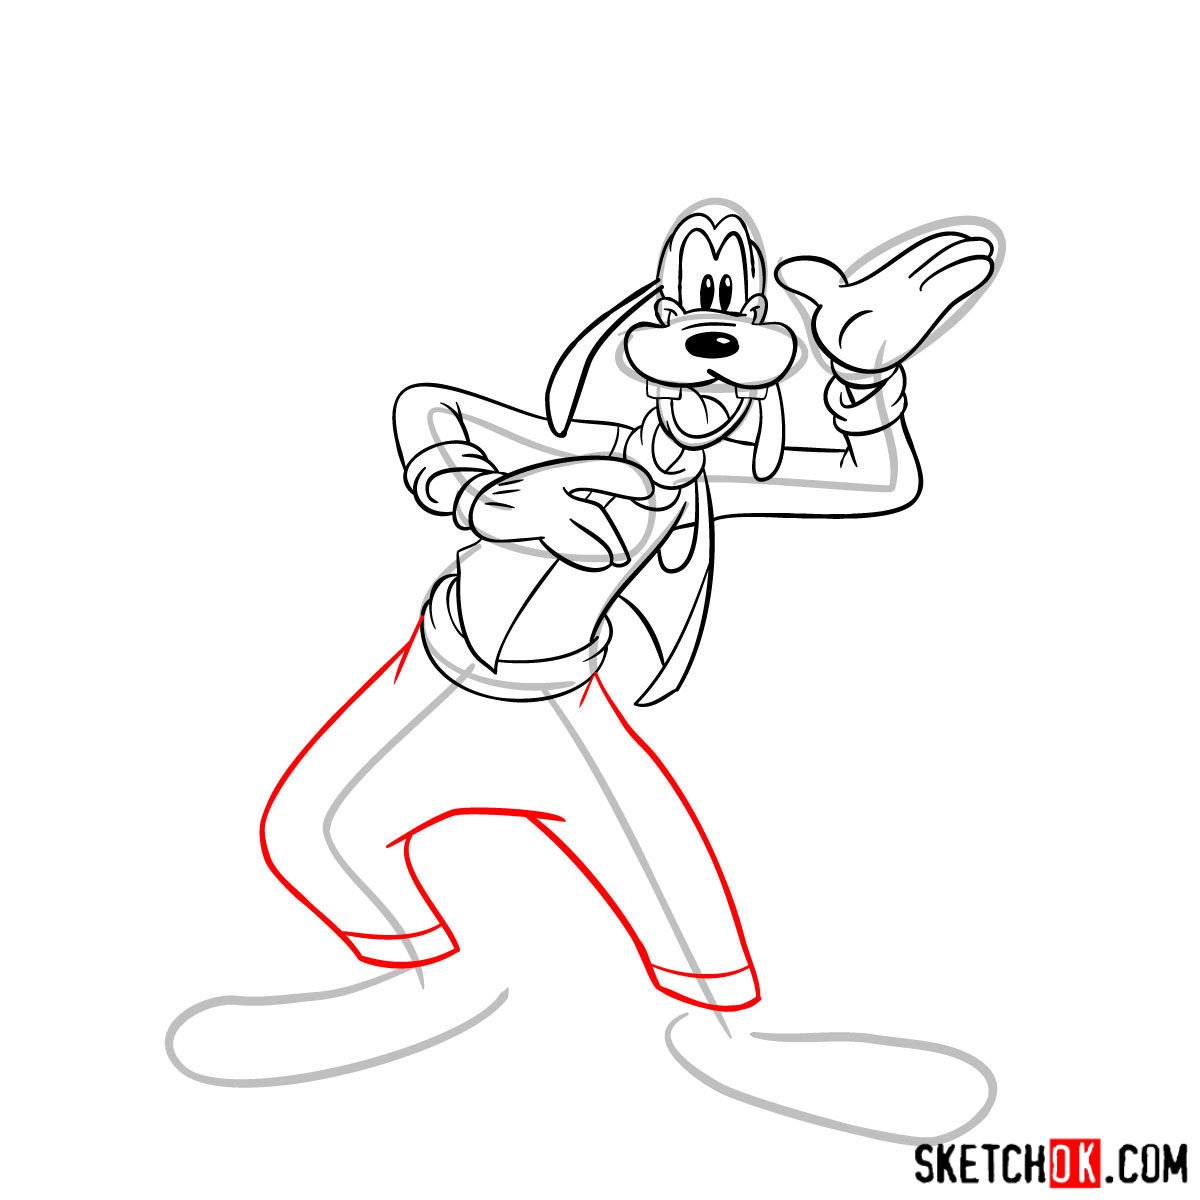 How to draw Goofy - step 11